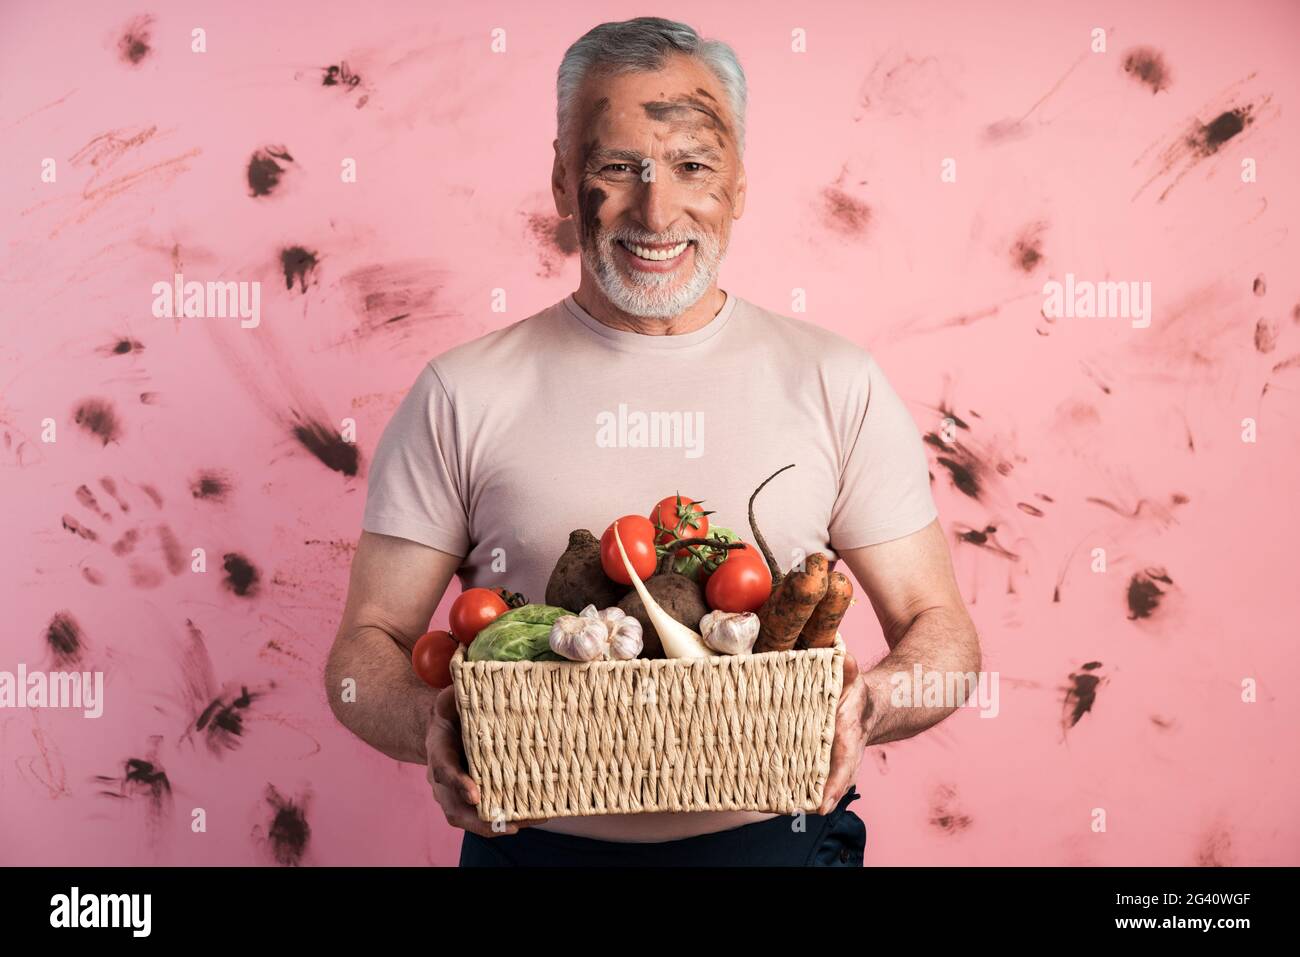 Smiling, positive senior man holding a basket of fresh vegetables against a dirty pink wall. The concept of farming, household., Smiling, positive sen Stock Photo